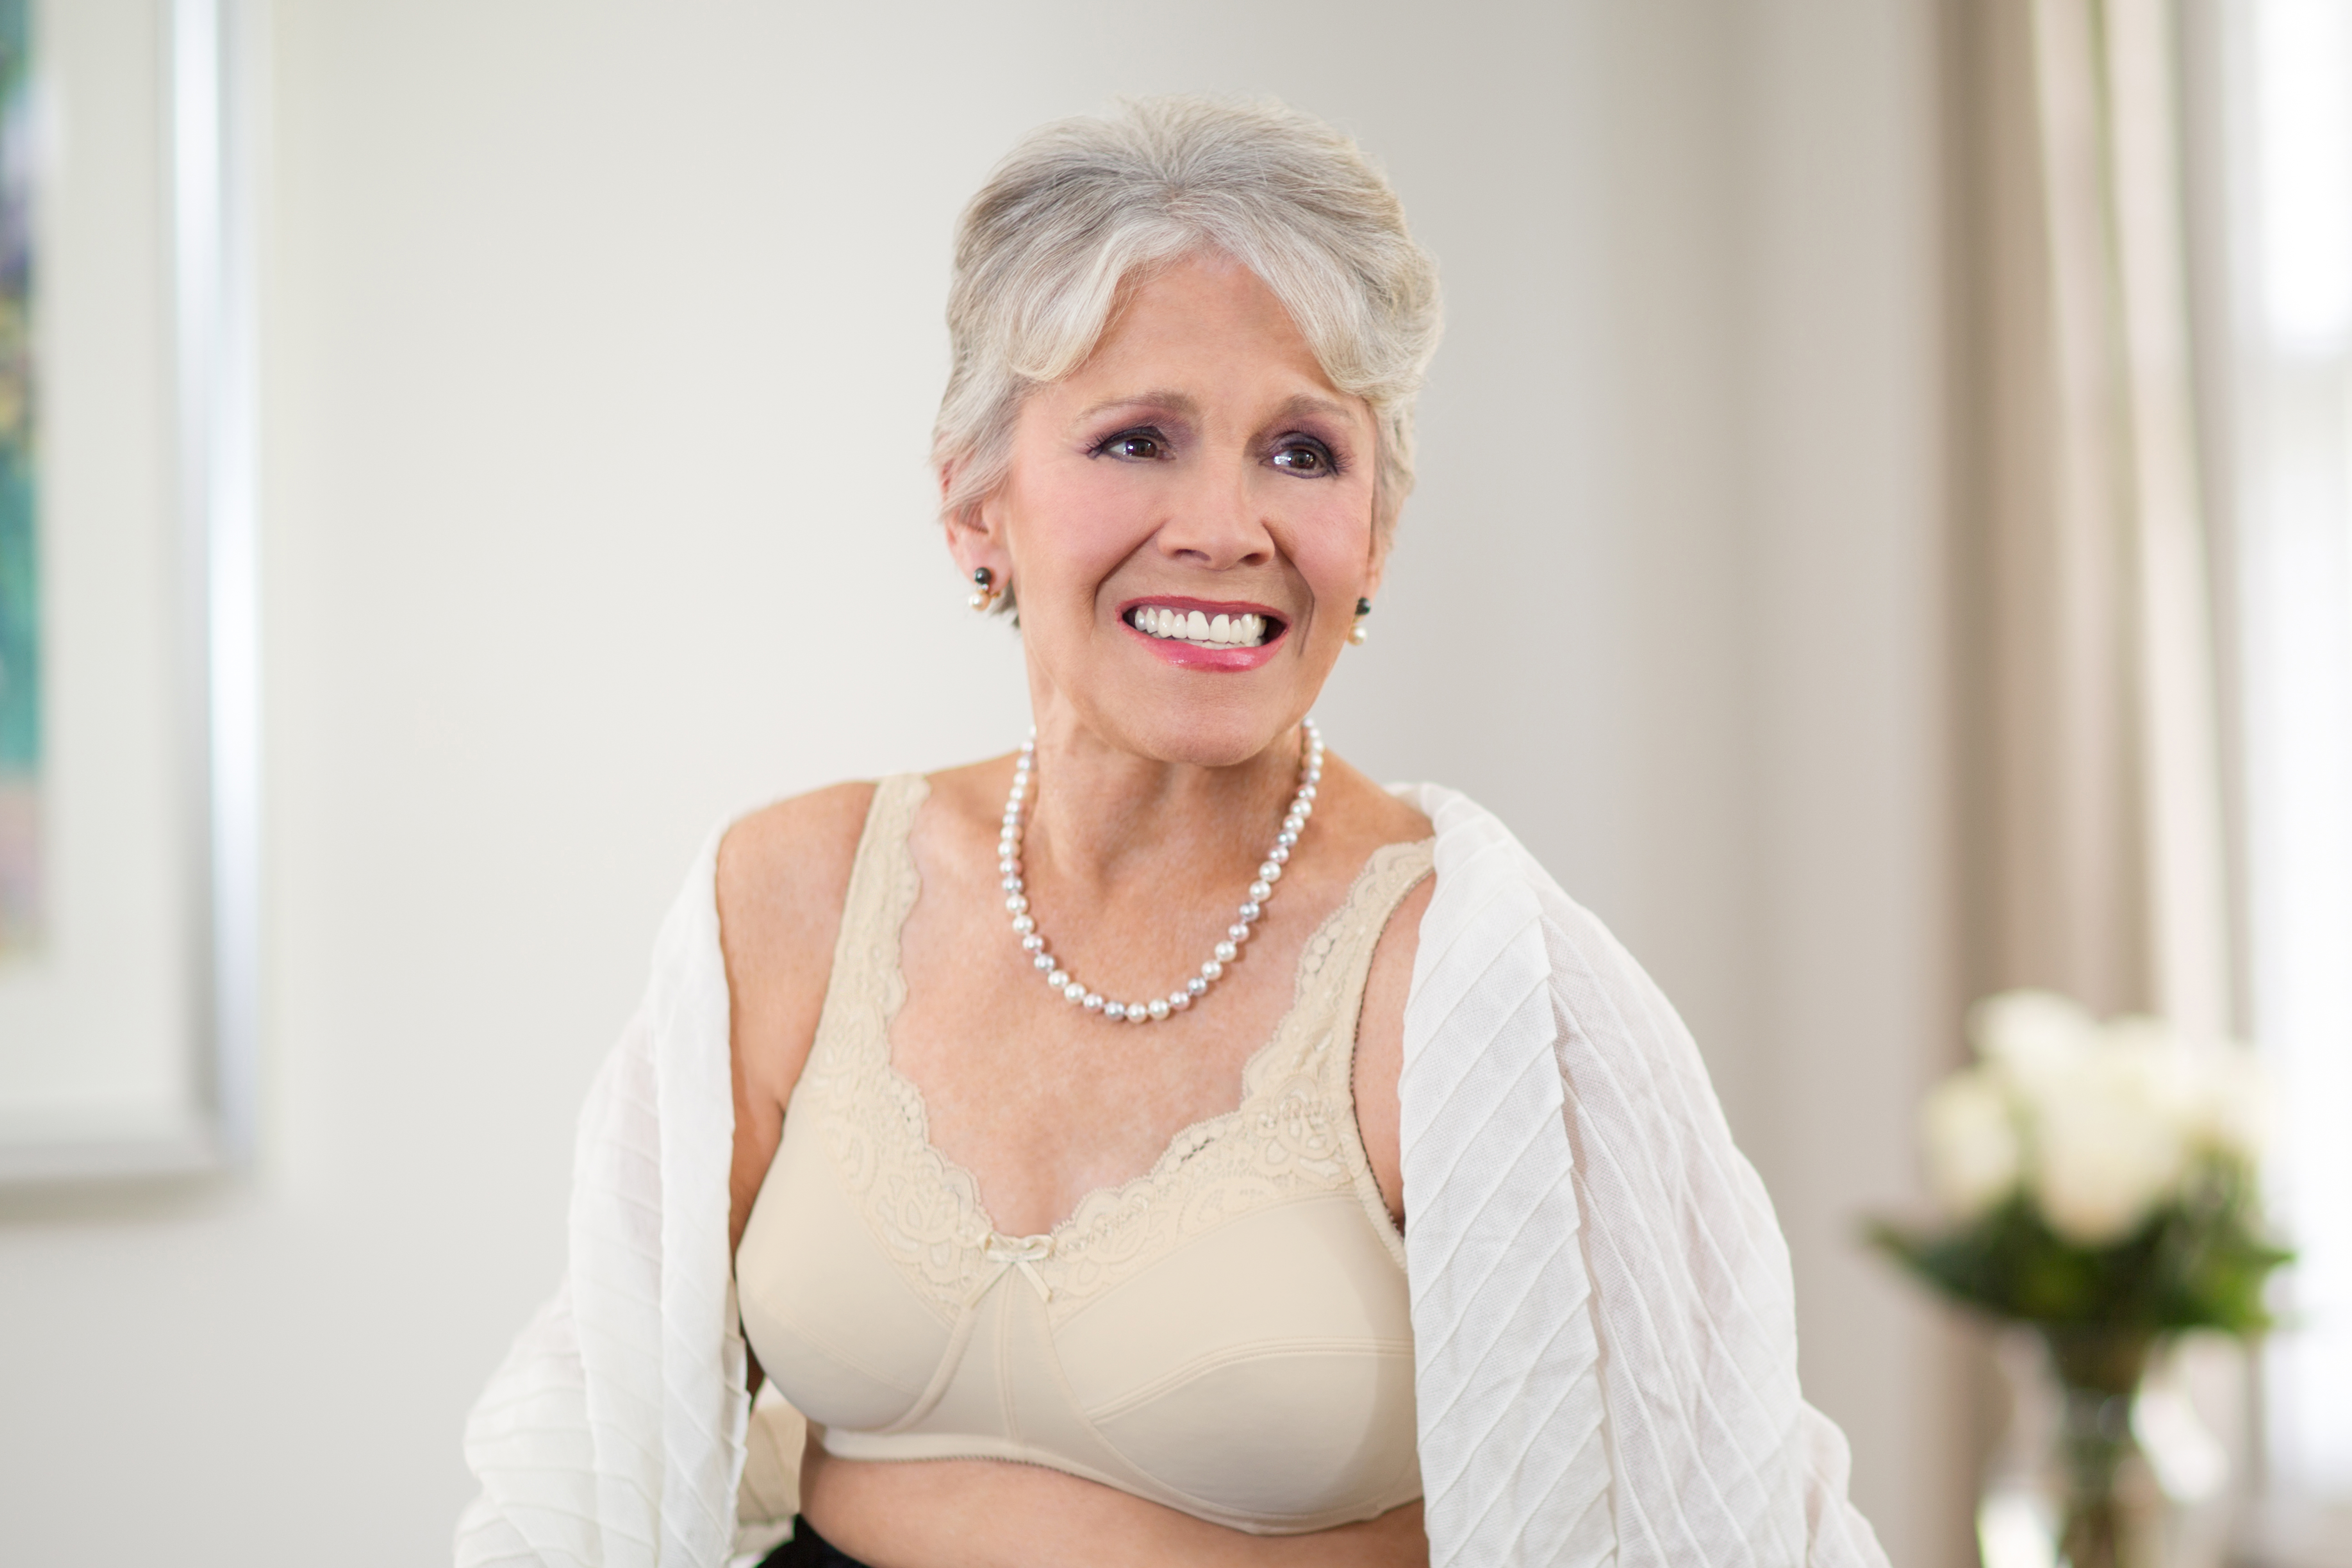 ABC 101 Lace Front Bilateral Pocketed Mastectomy Bra Available in 5 Colors. Call toll-free 800.525.5420.